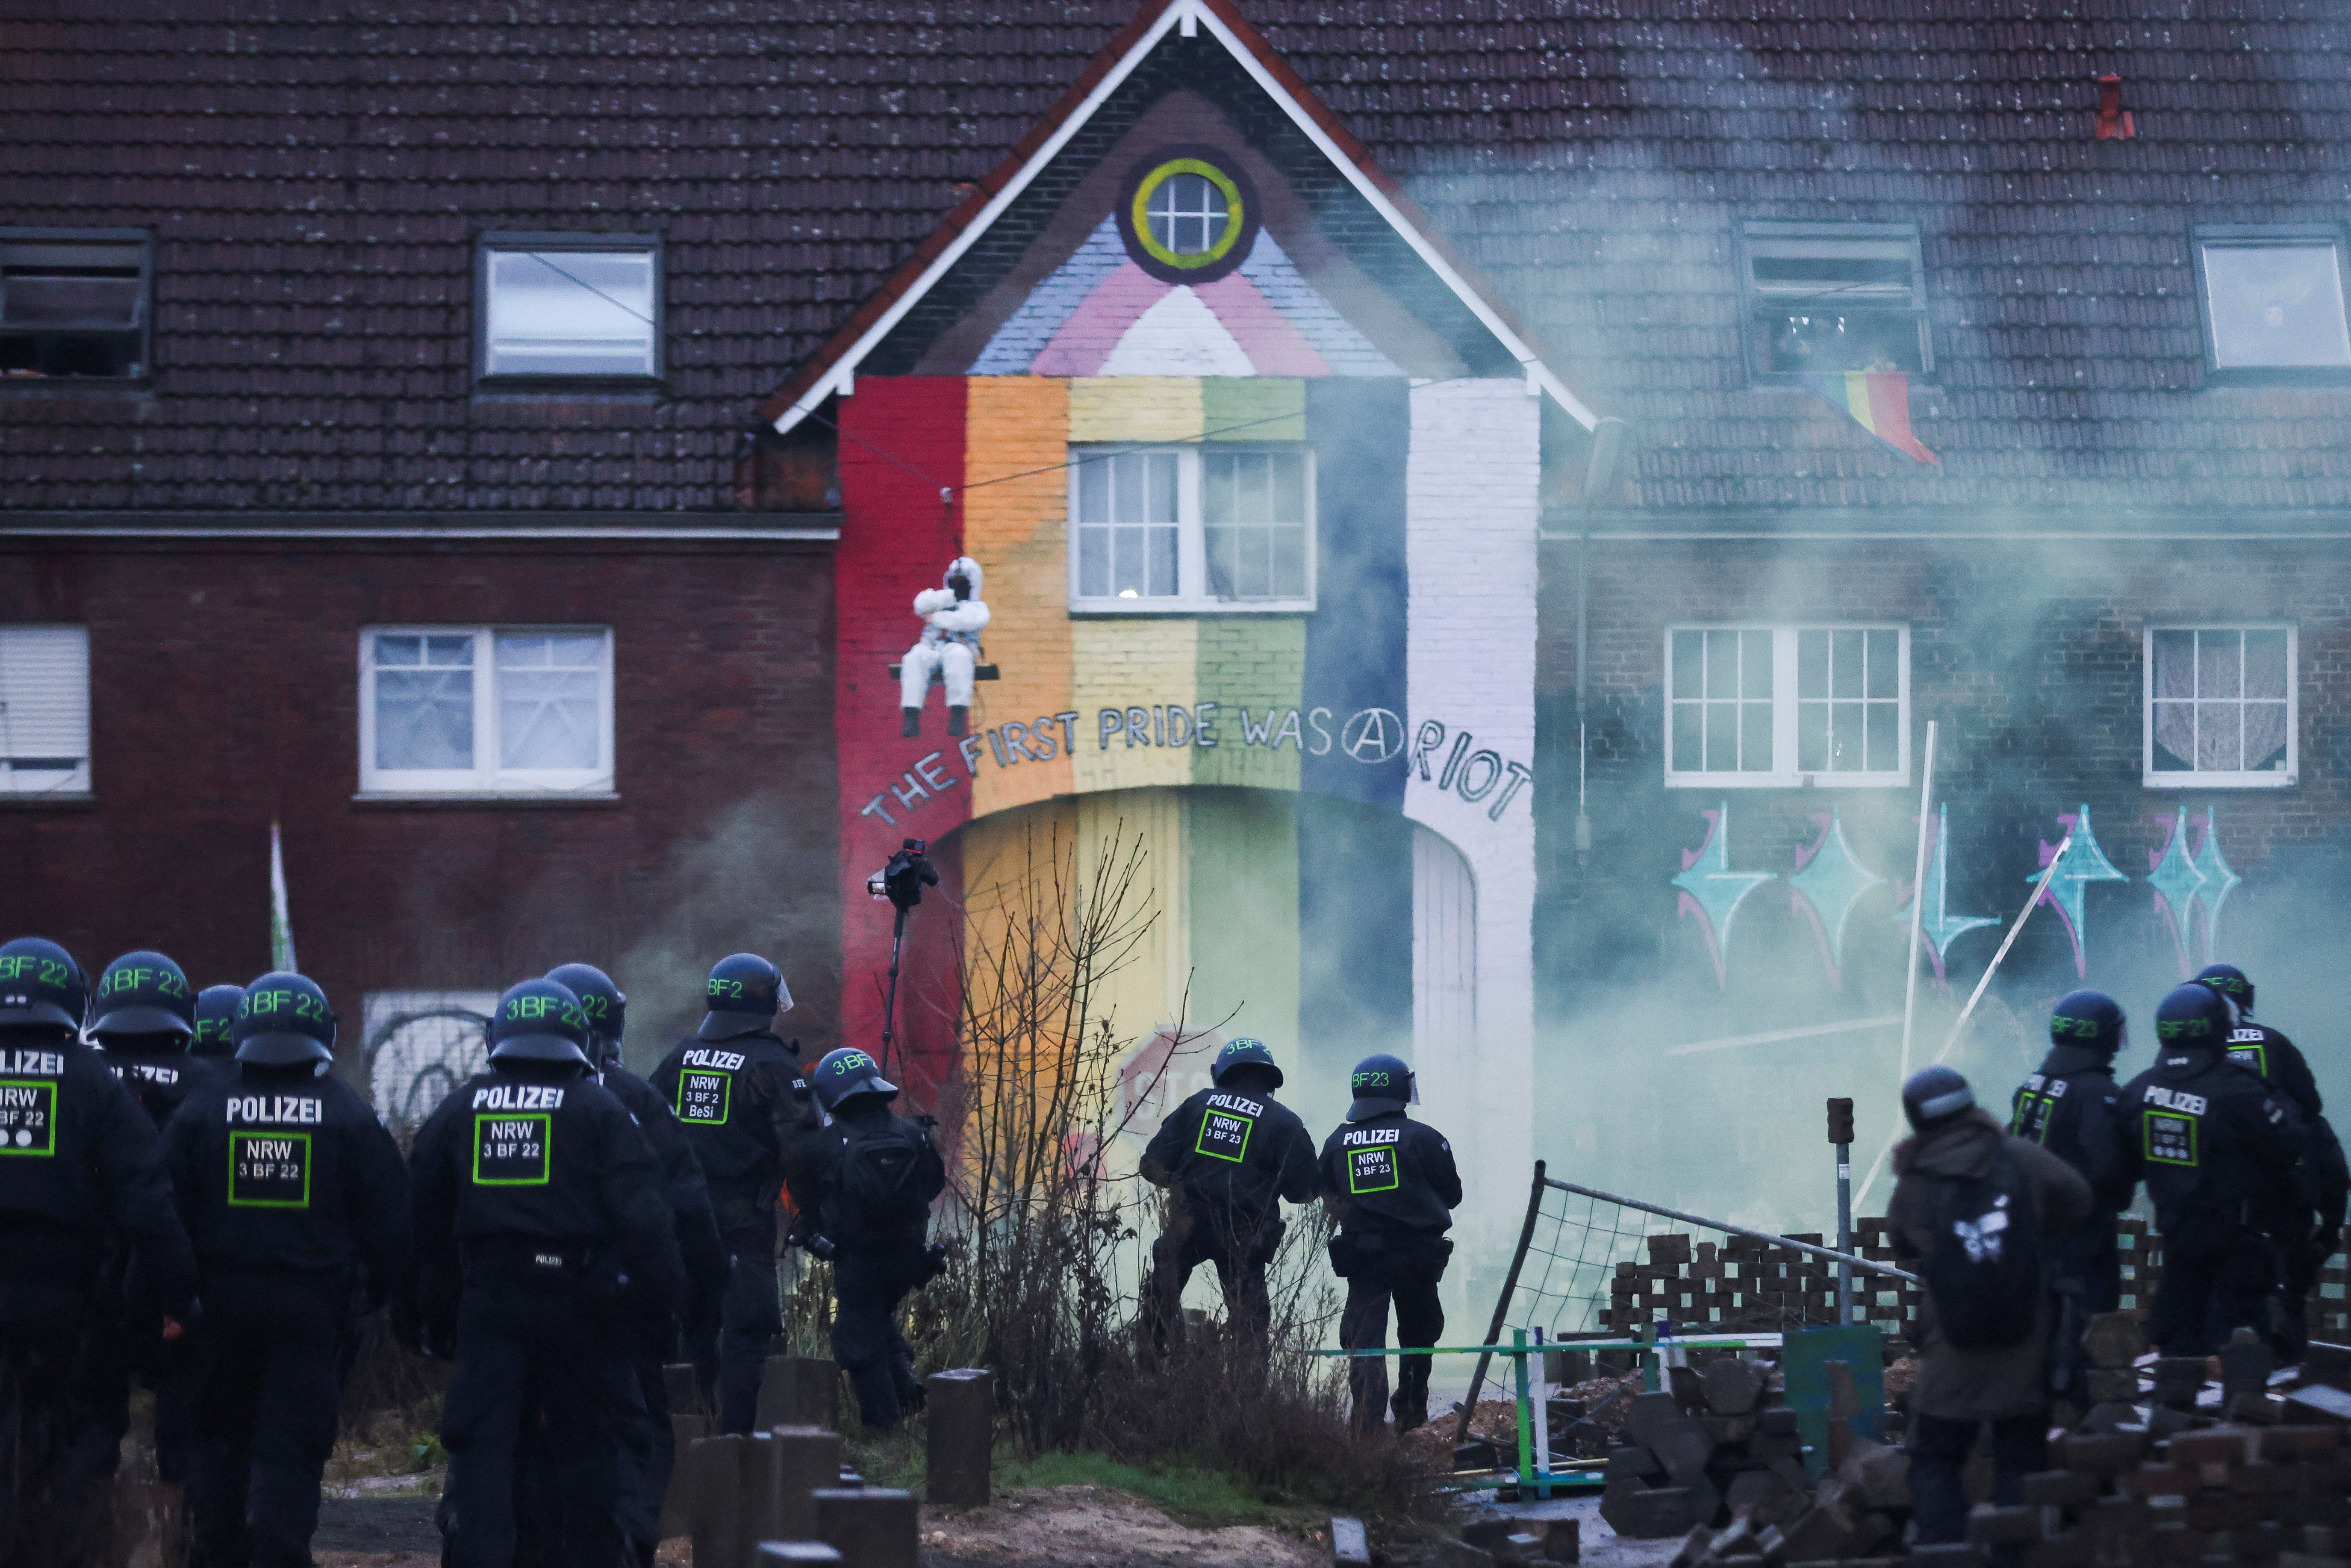 German police clashed with activists at a coal mine expansion demonstration in Lutzerat